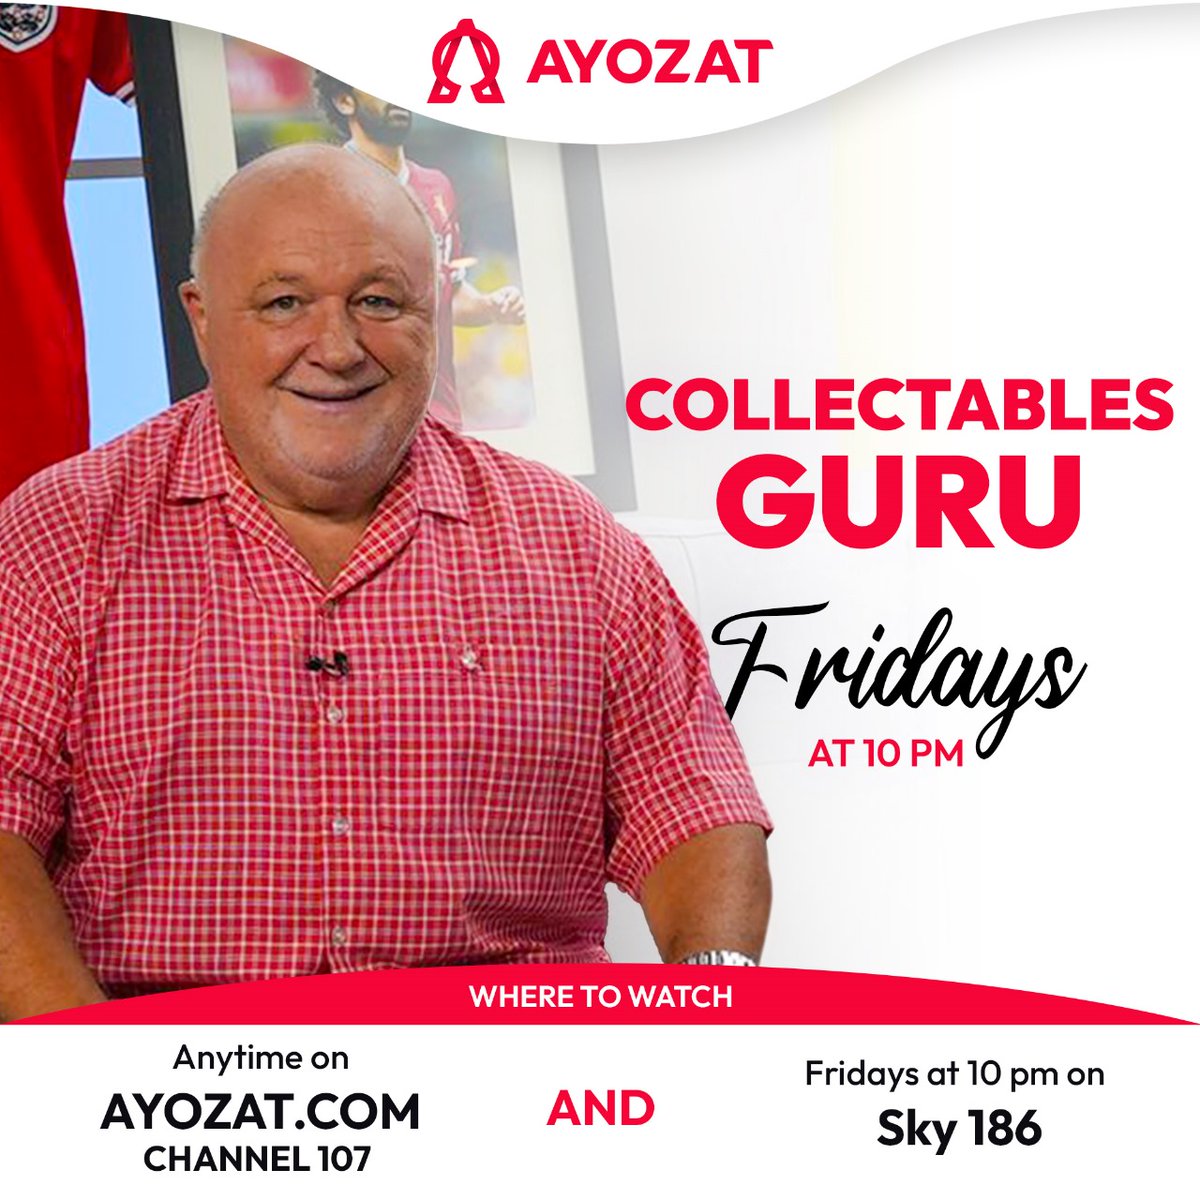 Enter the world of collectables with Collectables Guru! Join us on channel 107 at ayozat.com or tune in Fridays at 10pm on Sky 186 for expert insights and the thrill of the hunt. Don't miss out on your next prized possession! #Collectables #vintage @CollectablesGu